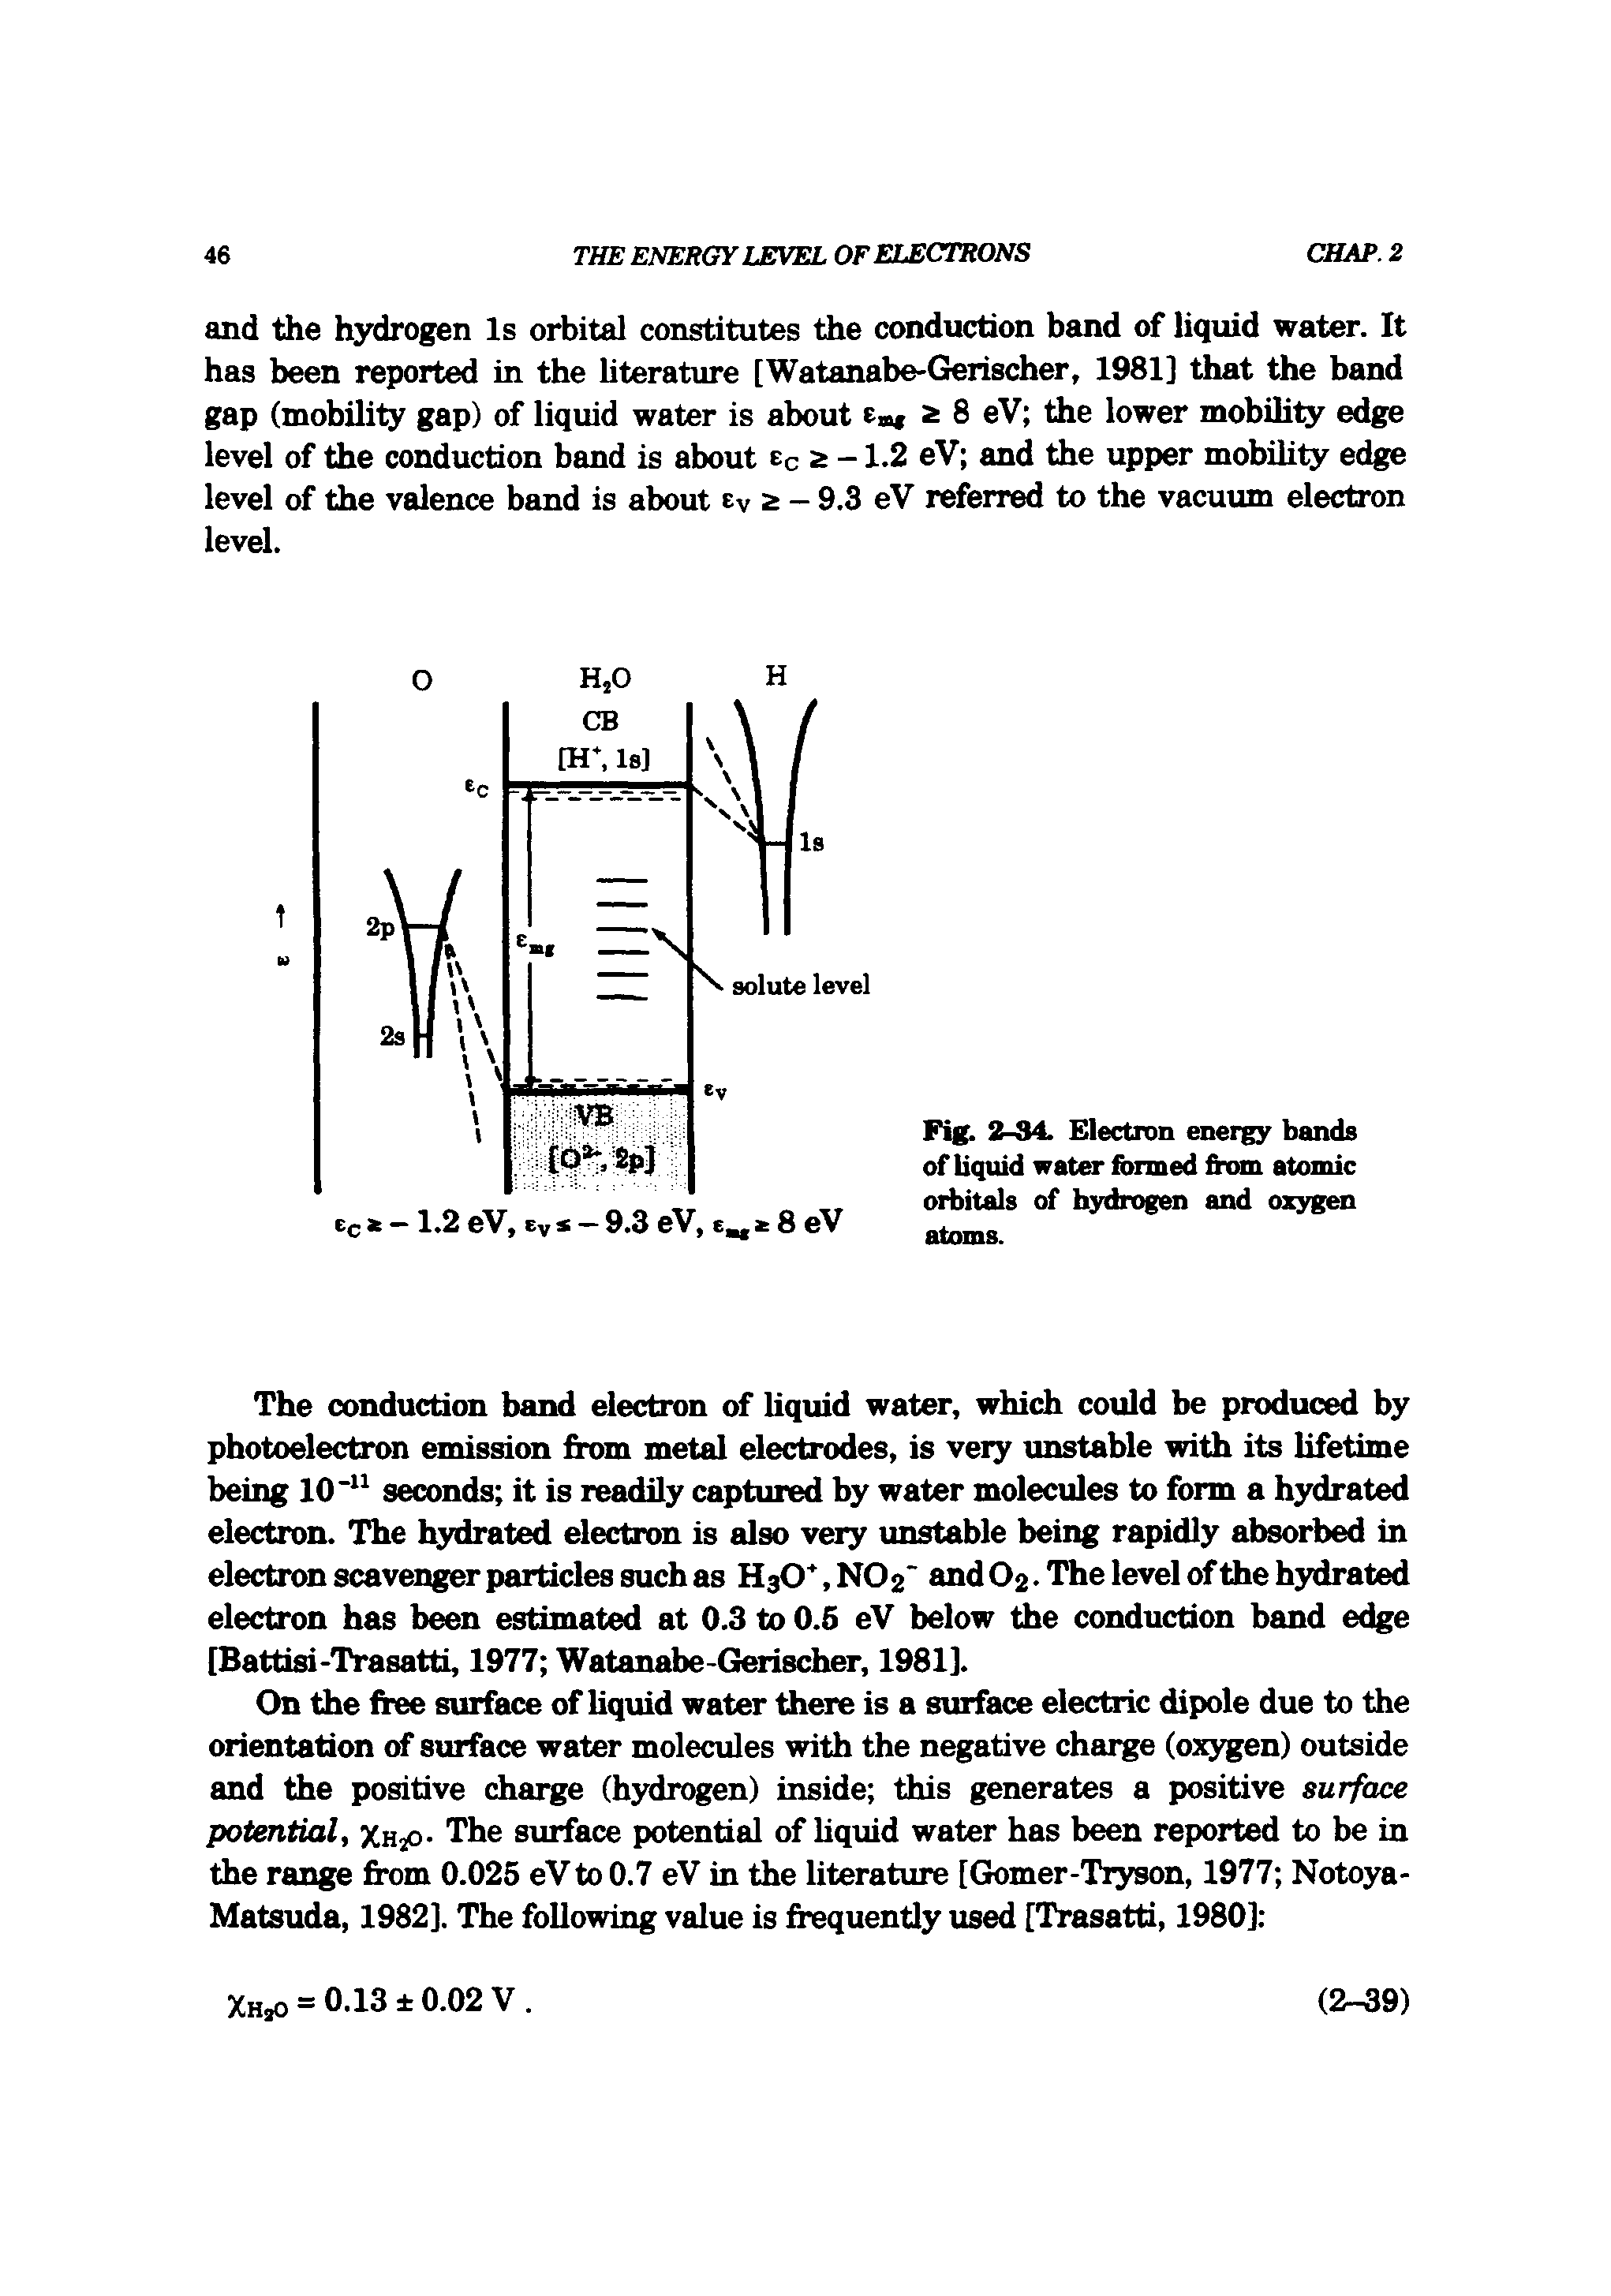 Fig. 2-34. Electron energy bands of liquid water formed from atomic orbitals of hydrogen and oxygen atoms.